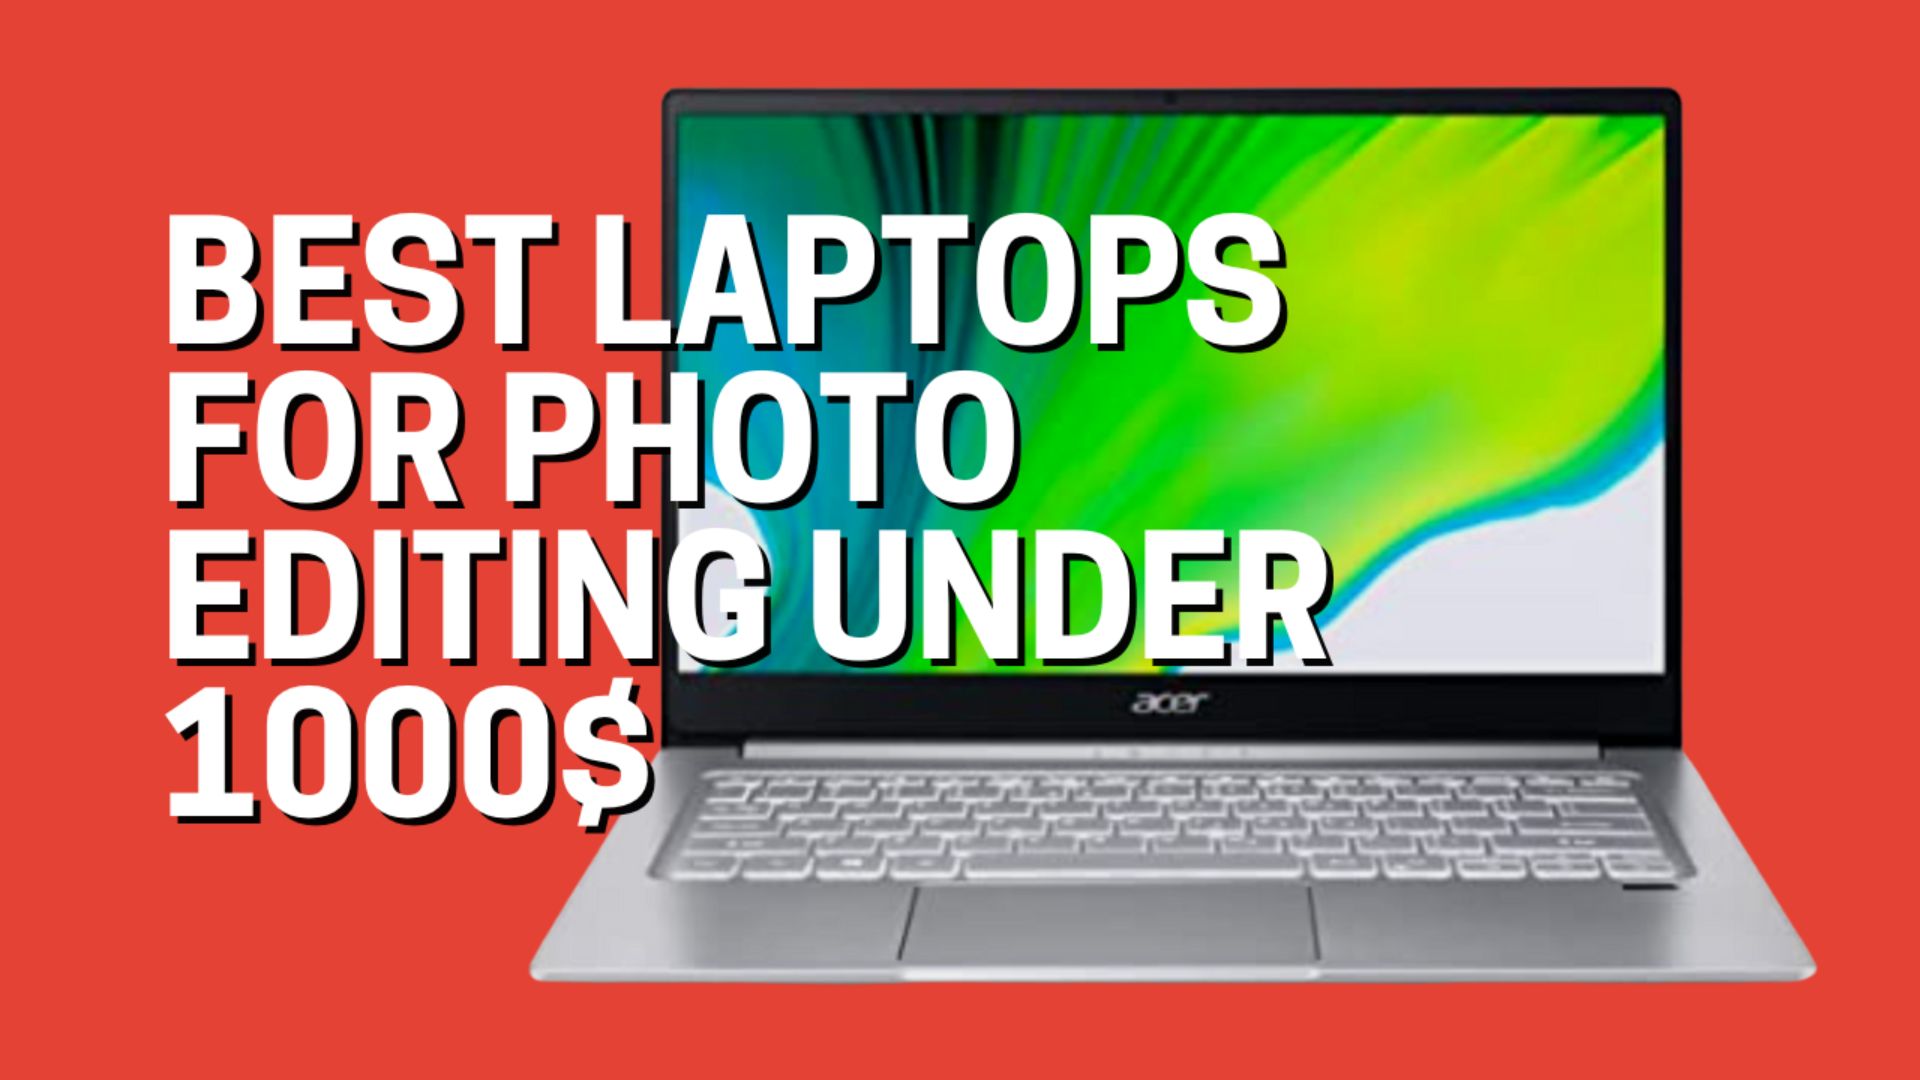 Best Laptops For Photo Editing Under 1000$